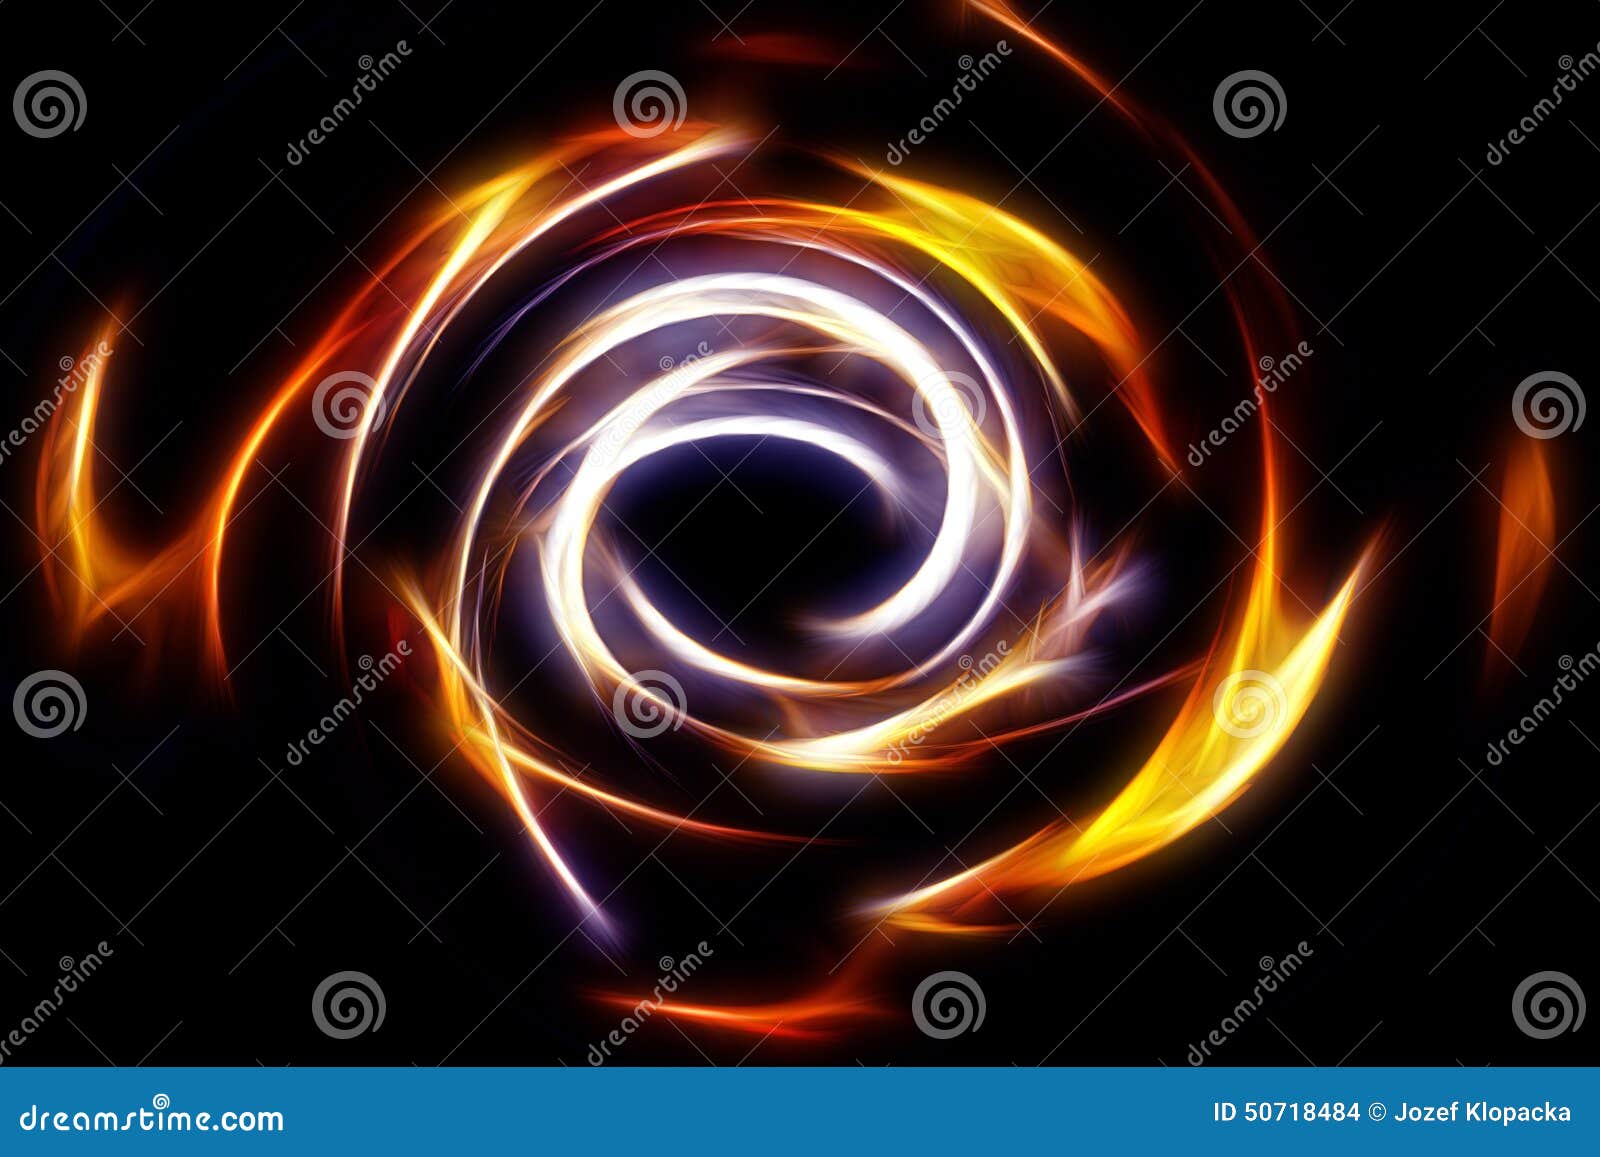 beautiful abstract fire circle on a black background.